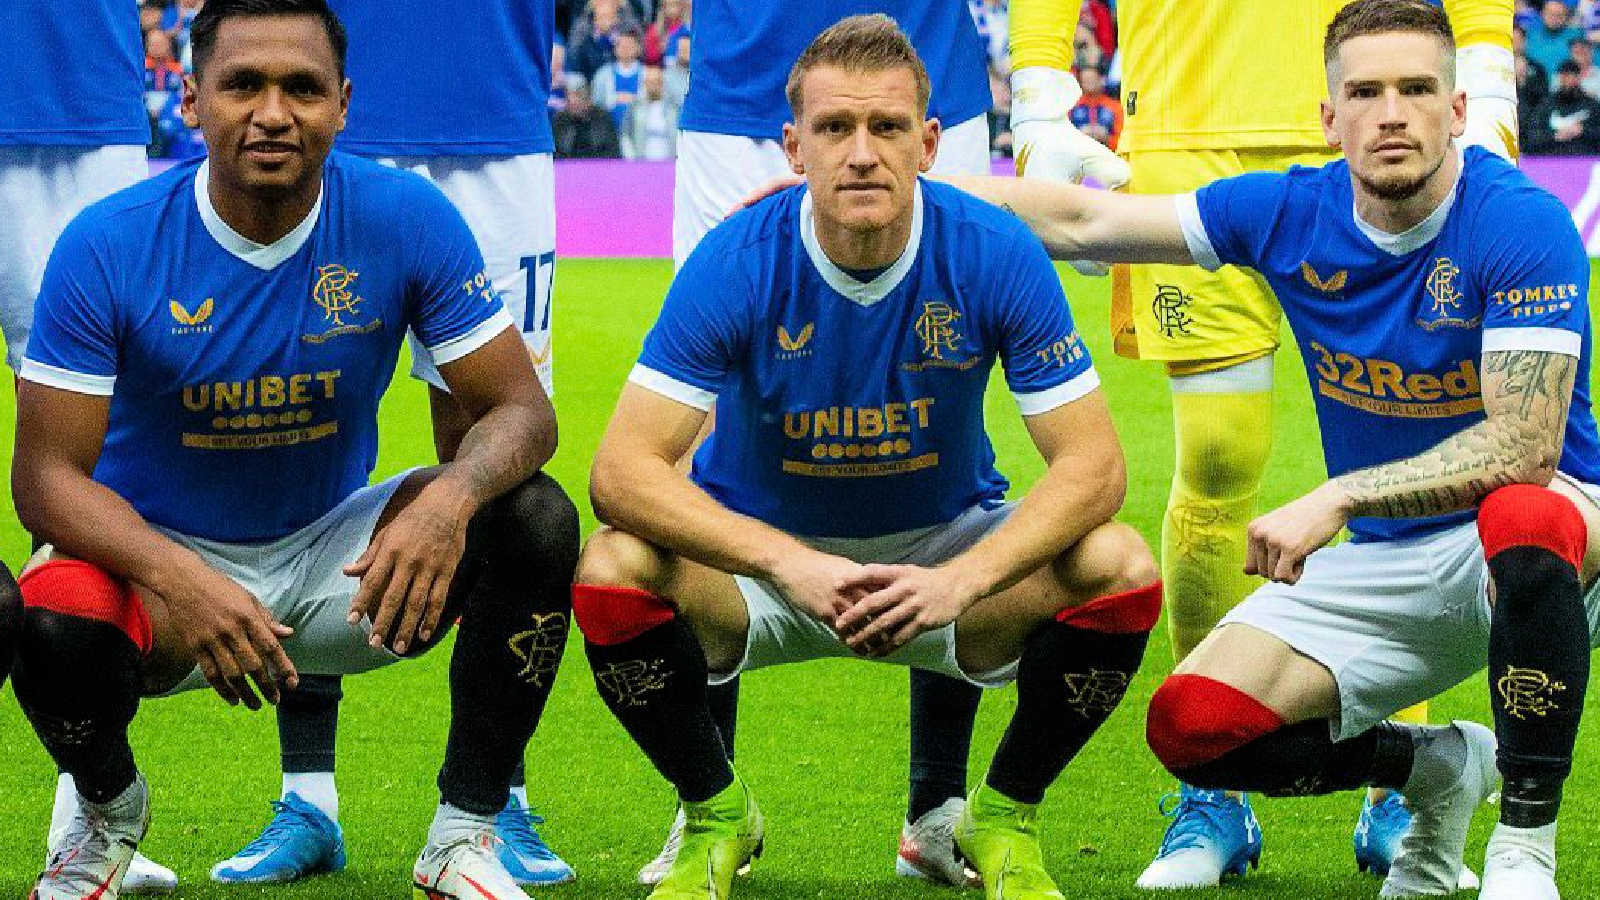 Ryan Kent kit looked a bit different than his teammates